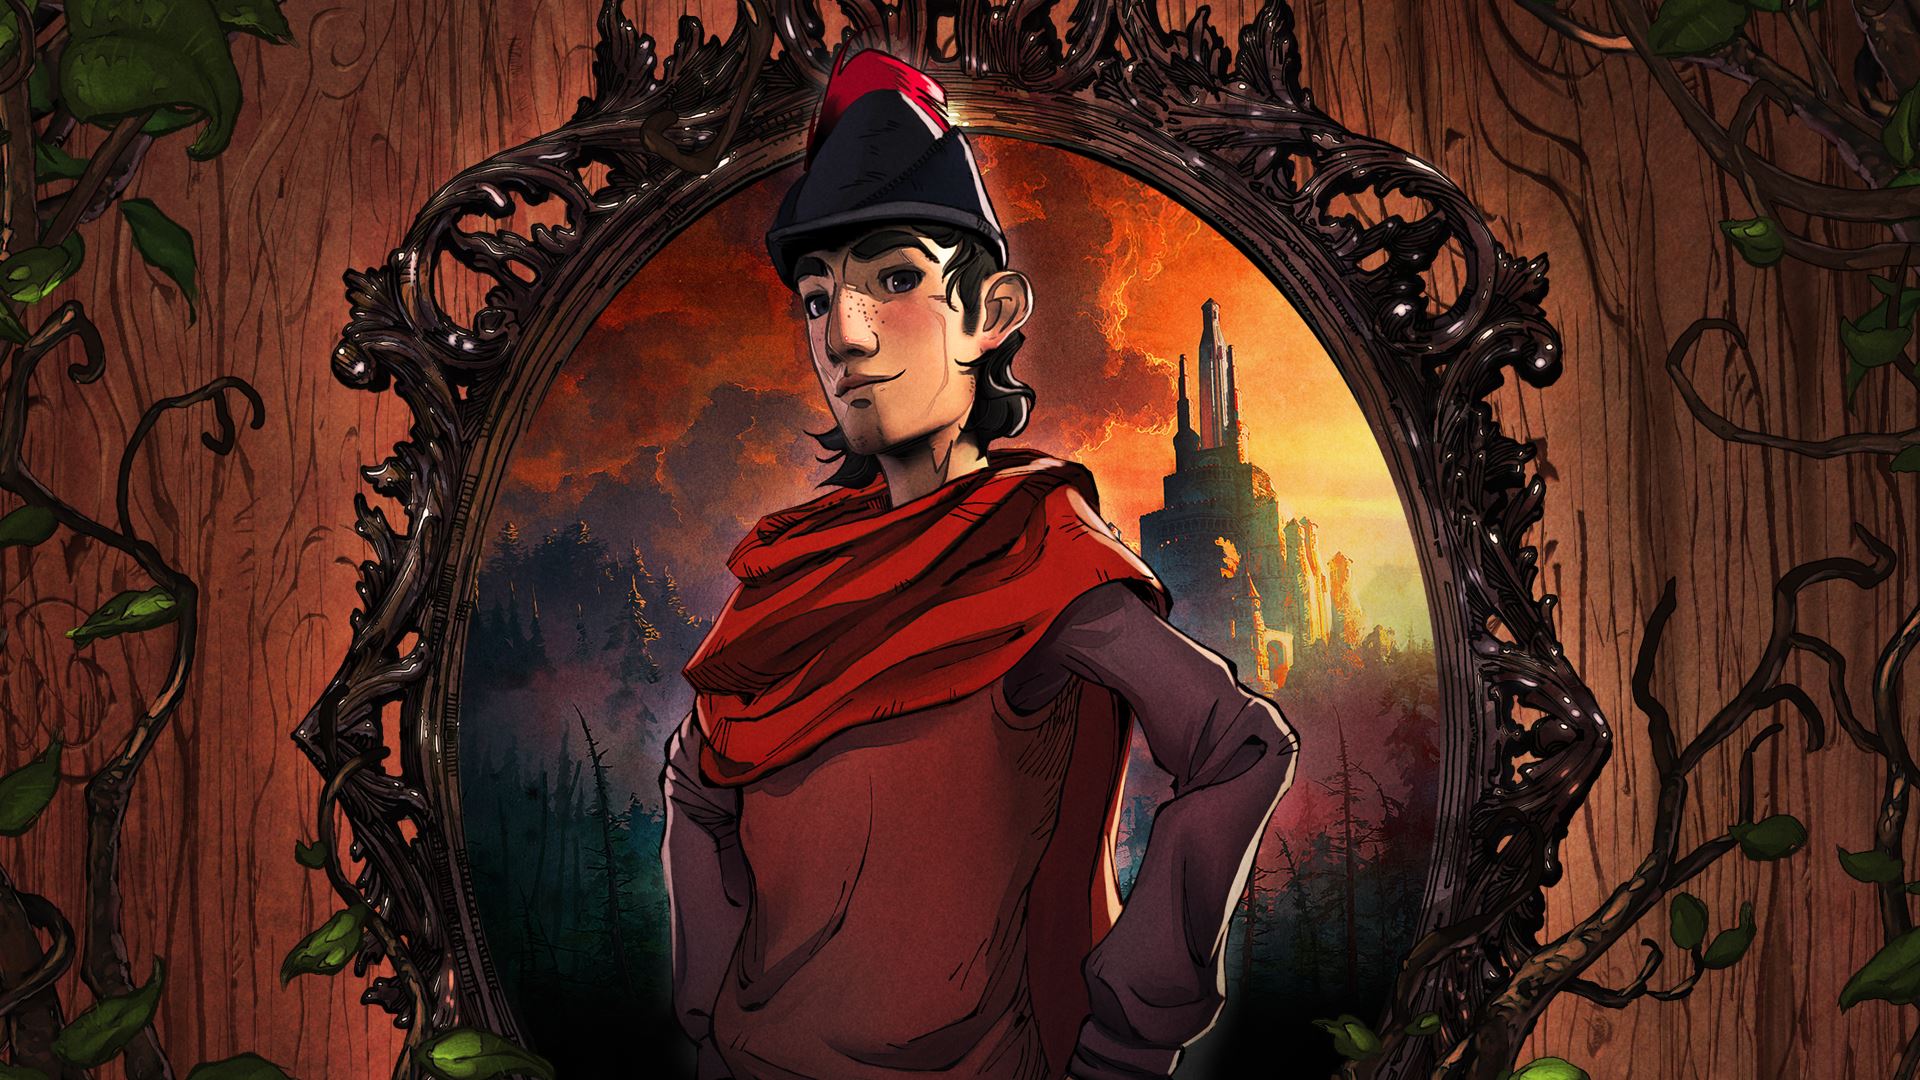 King's Quest – Champter 1 A Knight to Remember,